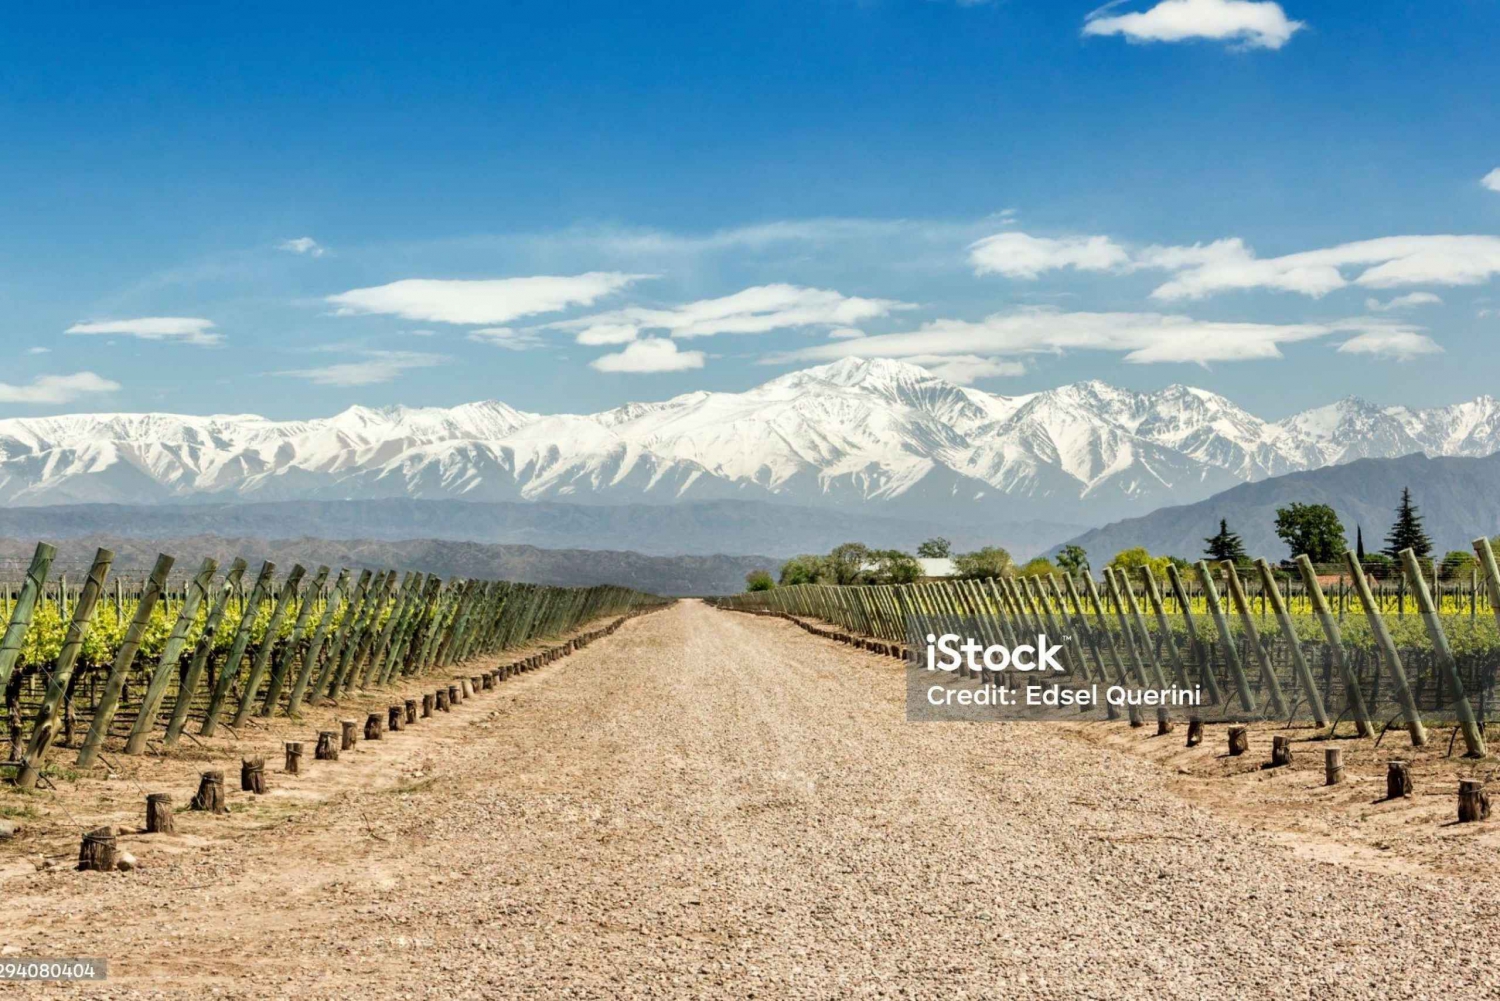 Mendoza- Private Driver With modern Car- Make your Own tour.